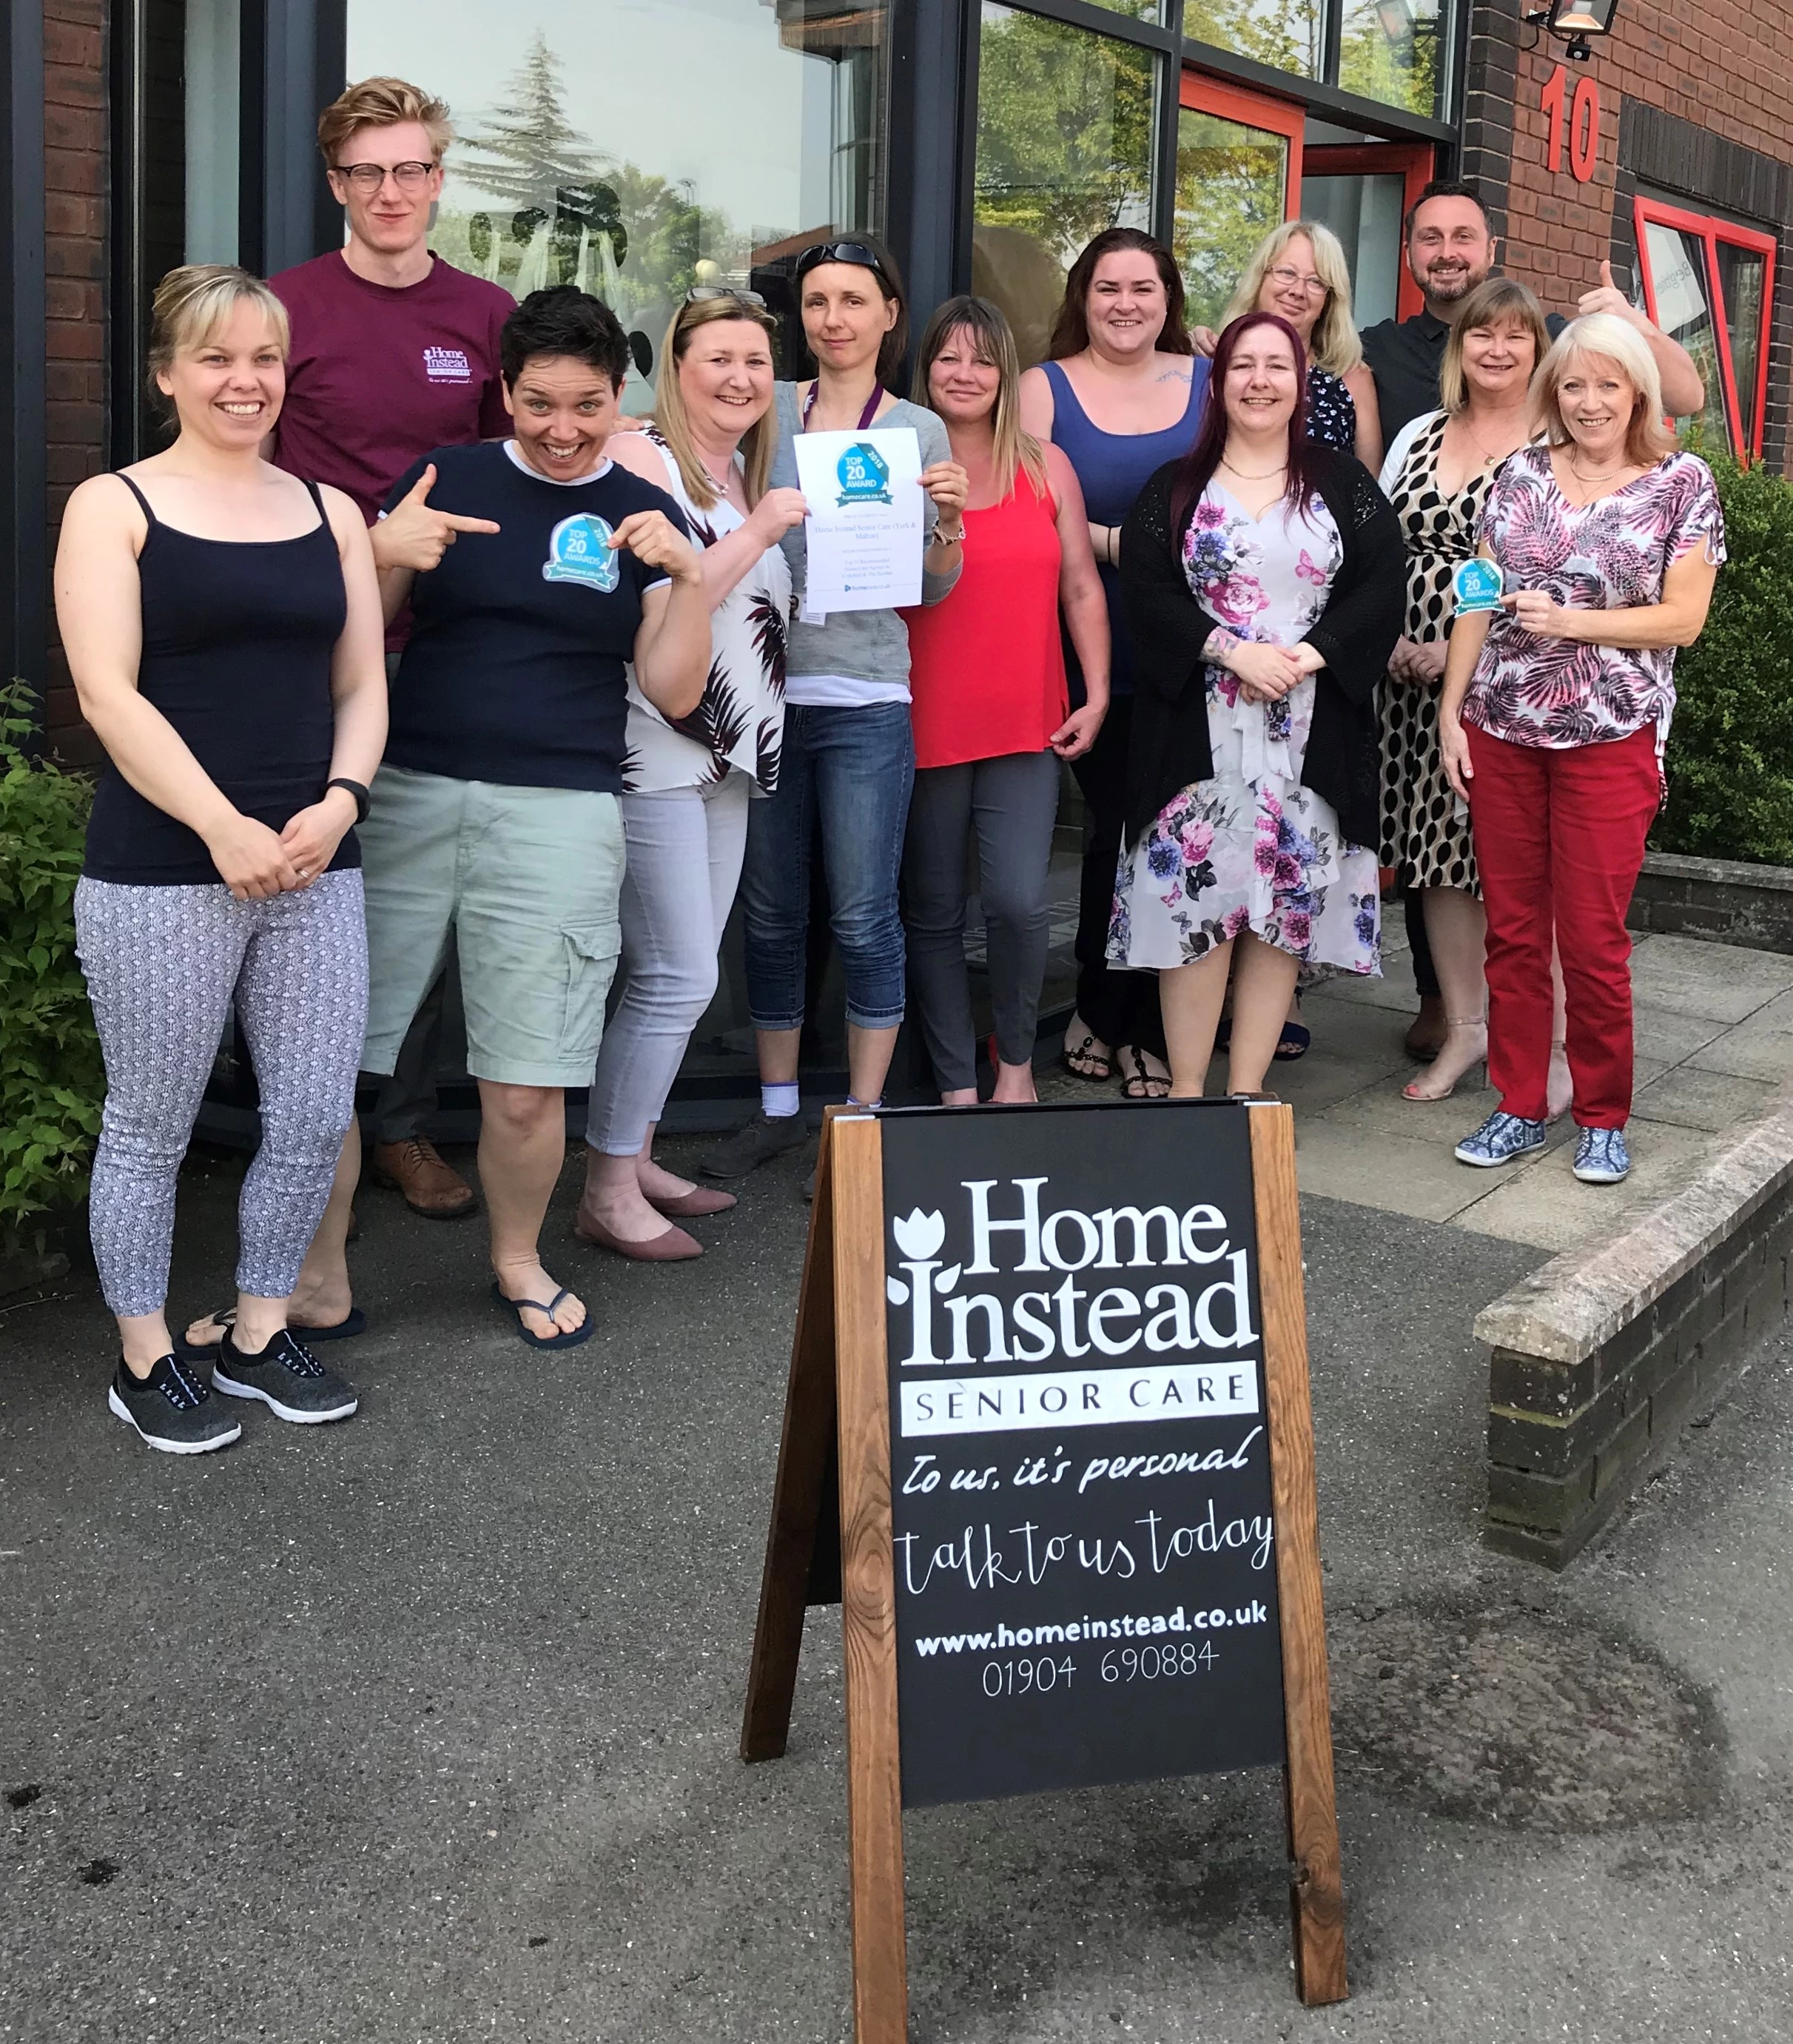 The team at Home Instead York celebrate their top 20 award